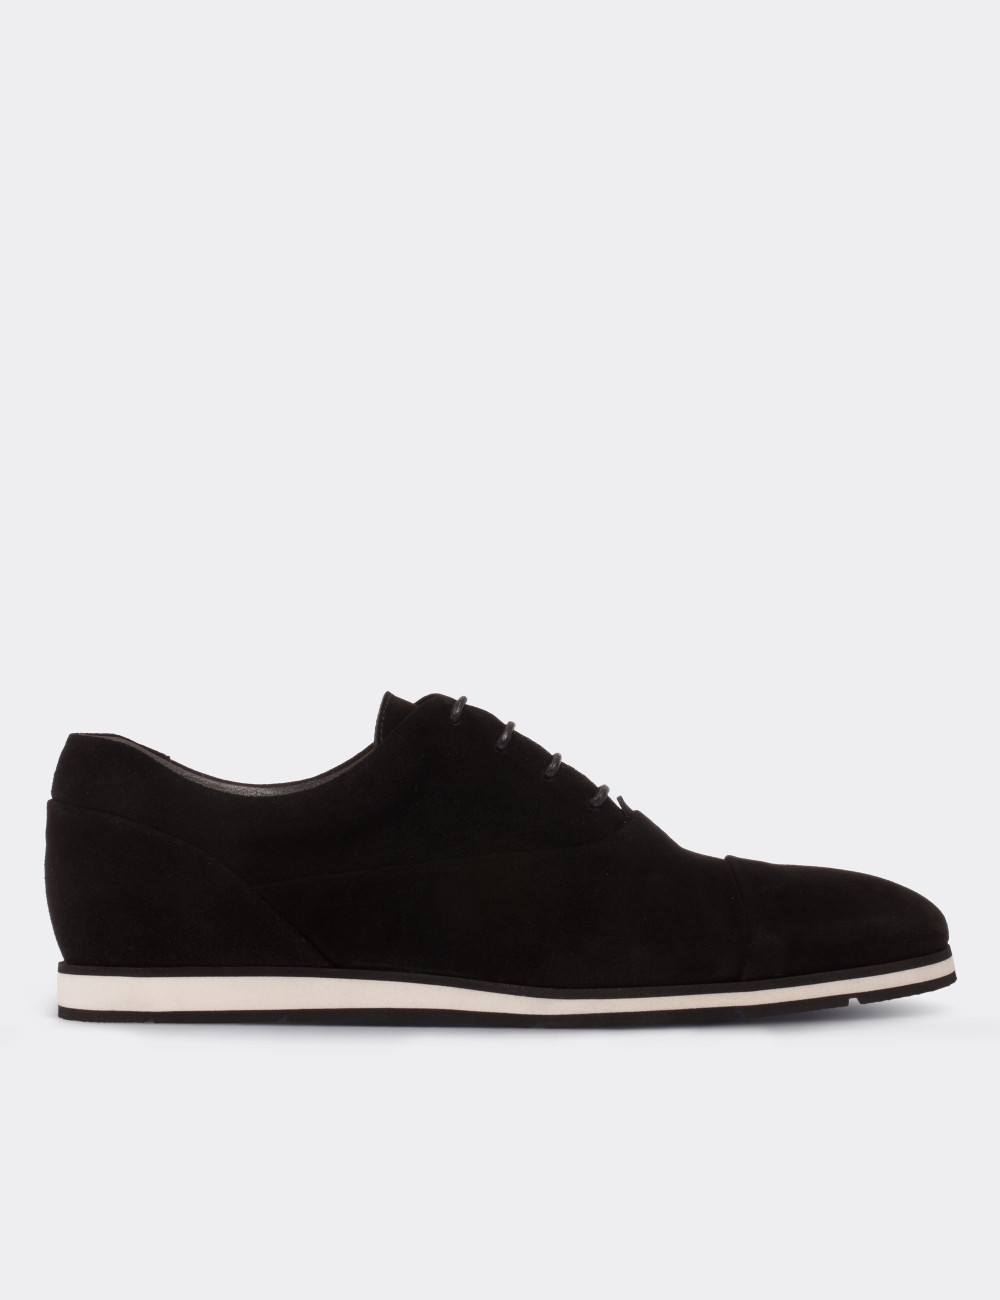 Black Suede Leather Lace-up Shoes - 01519MSYHE04